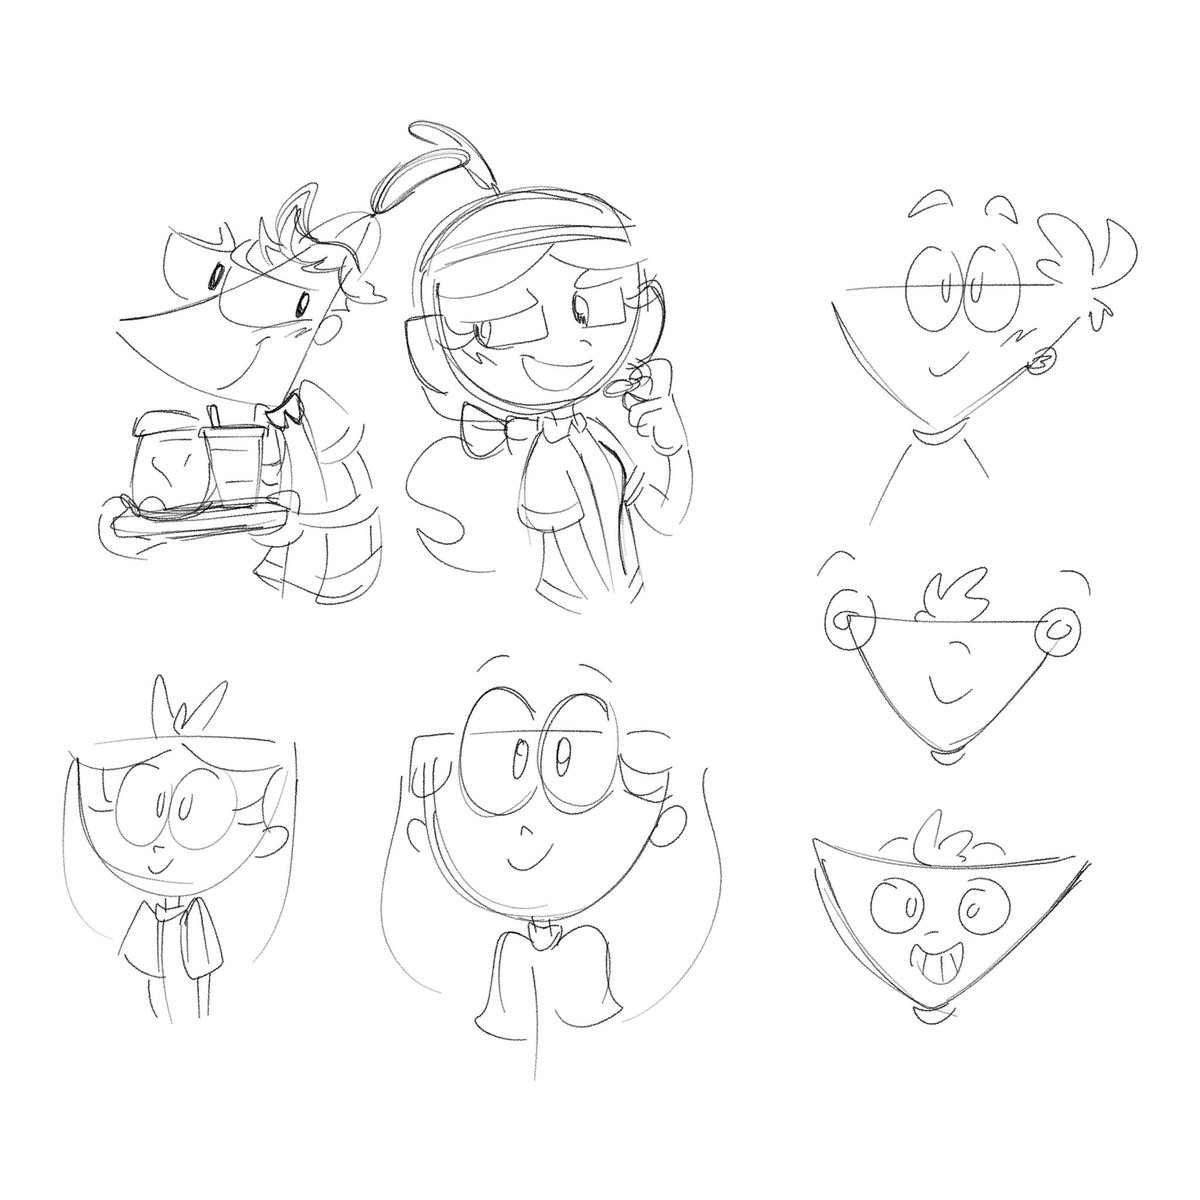 Some sketches I did while streaming on Discord VC

#phineasandferb #phineasadnferbfanart #undertale #undertalefanart
#phinabella #sansundertale #papyrusundertale #torielundertale #floweyundertale #phineasflynn #isabellagarciashapiro 
#garfield #deltarune